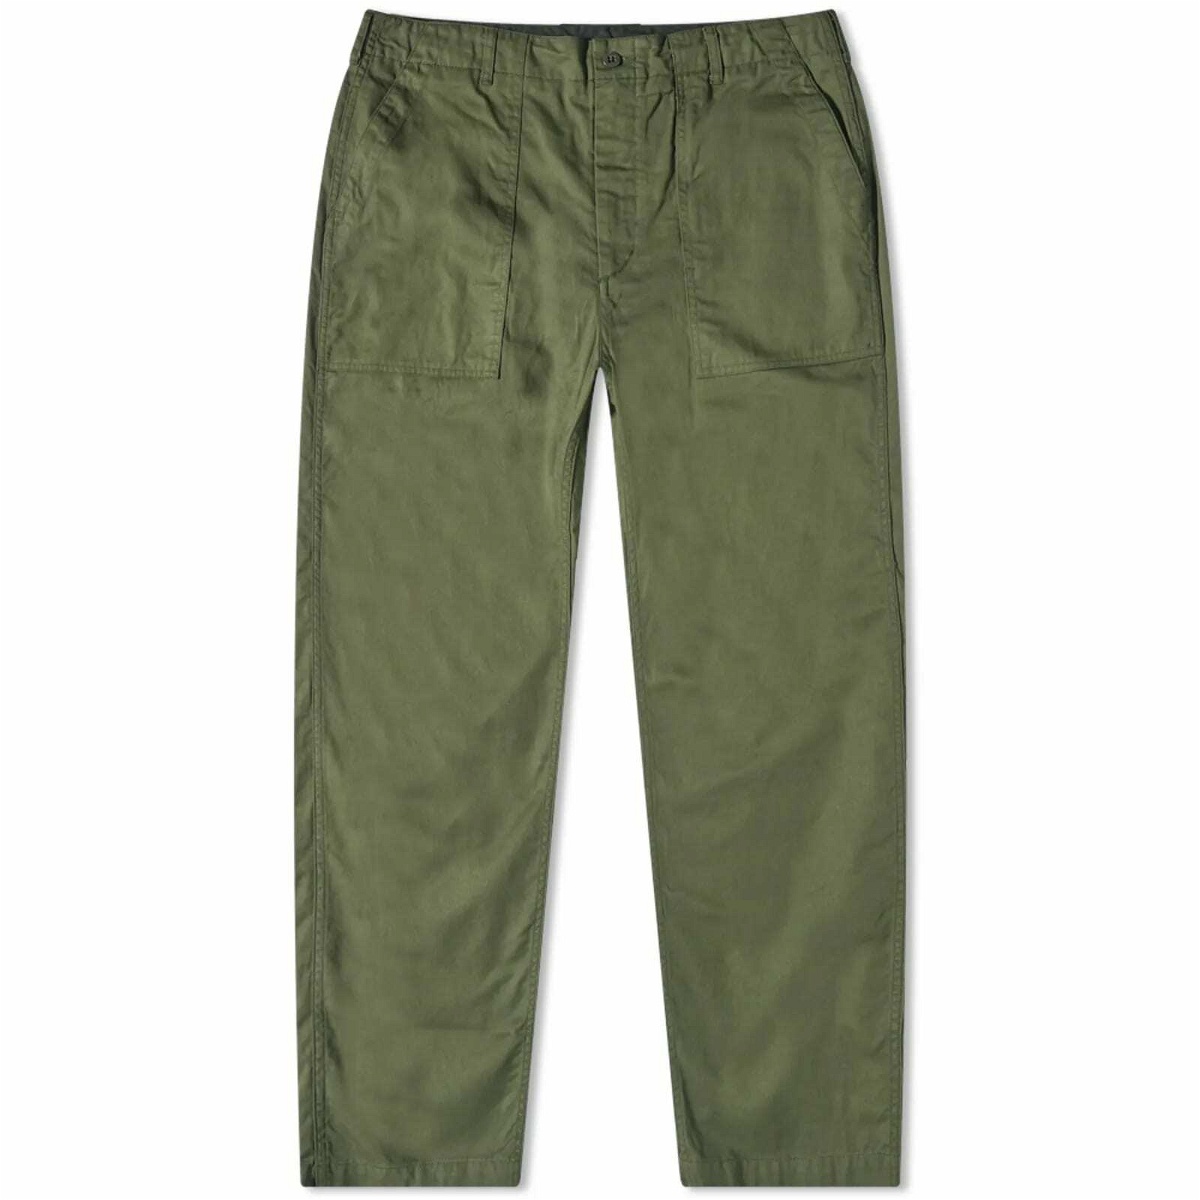 Photo: Engineered Garments Men's Workaday Fatigue Pant in Olive Reverse Sateen